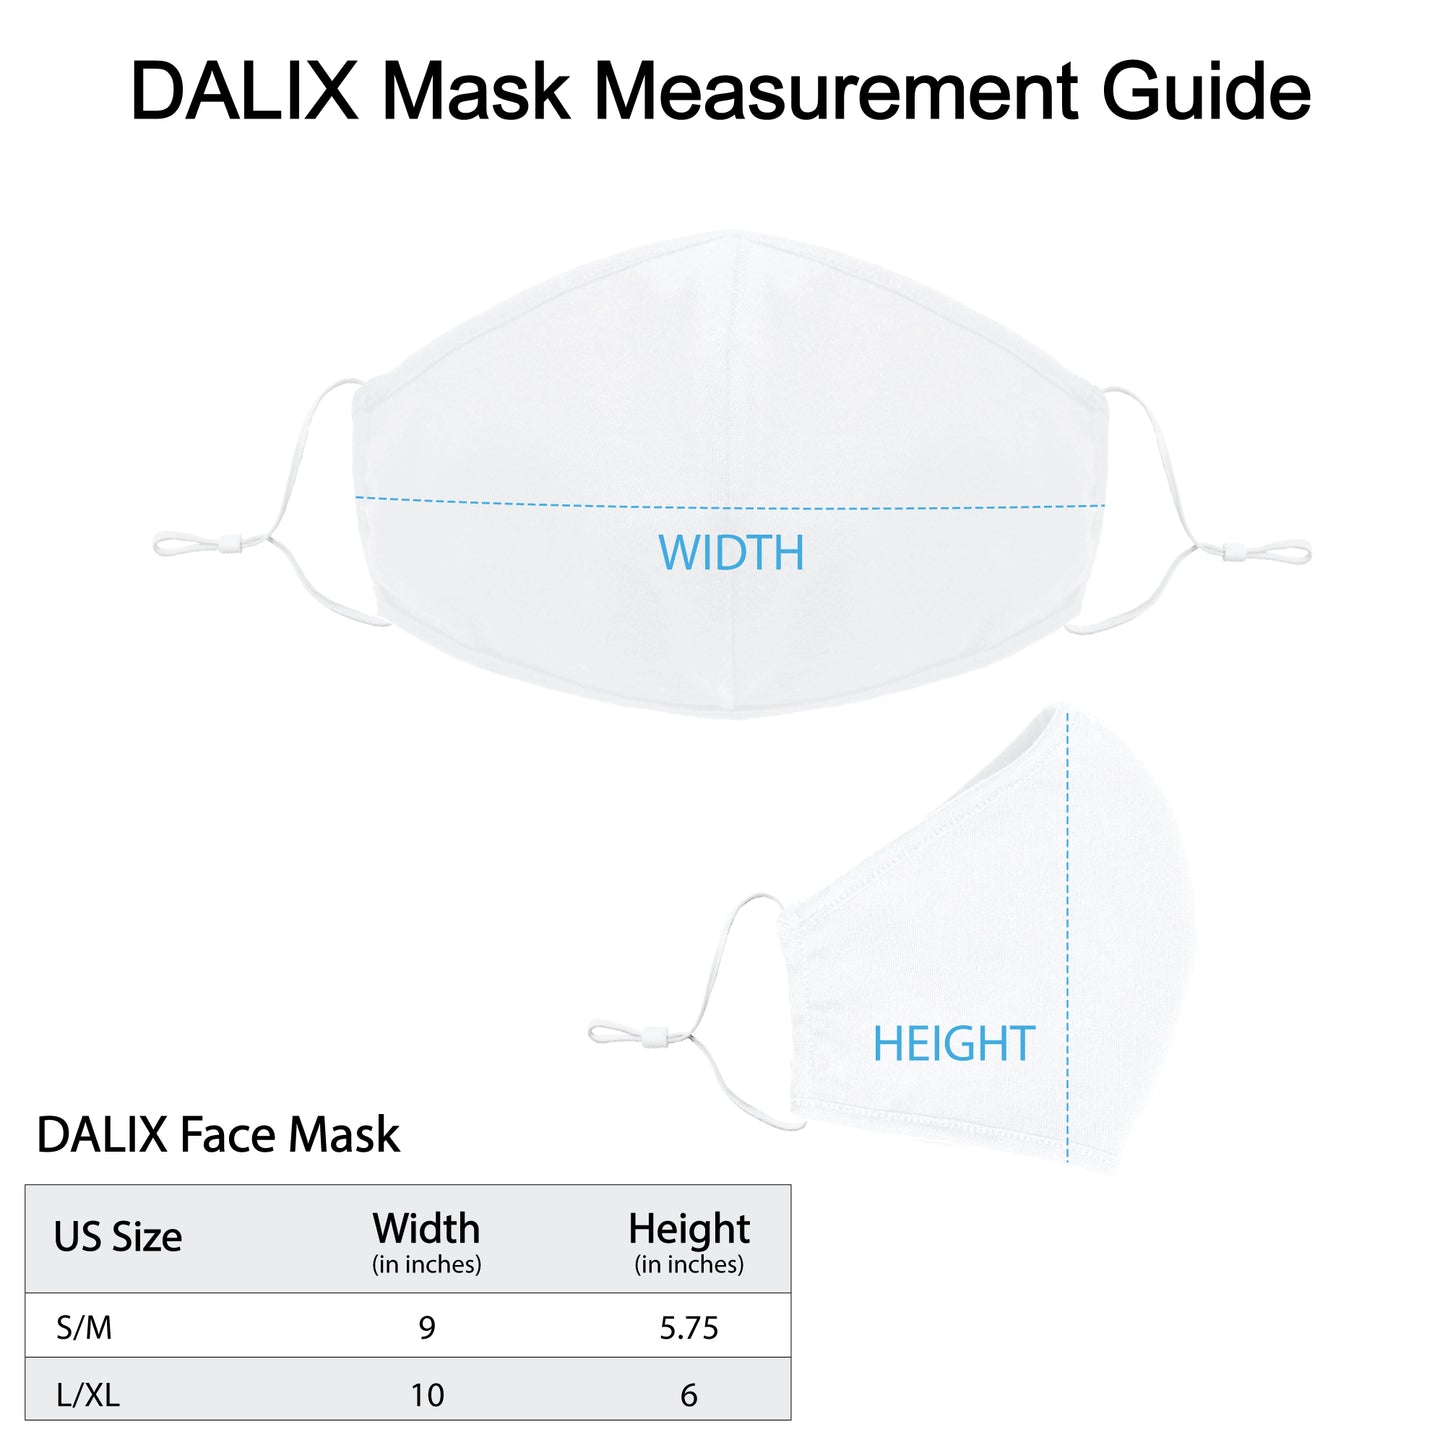 DALIX Cloth Face Mask Reuseable Washable Made in USA - S-M , L-XL Size (5 Pack)